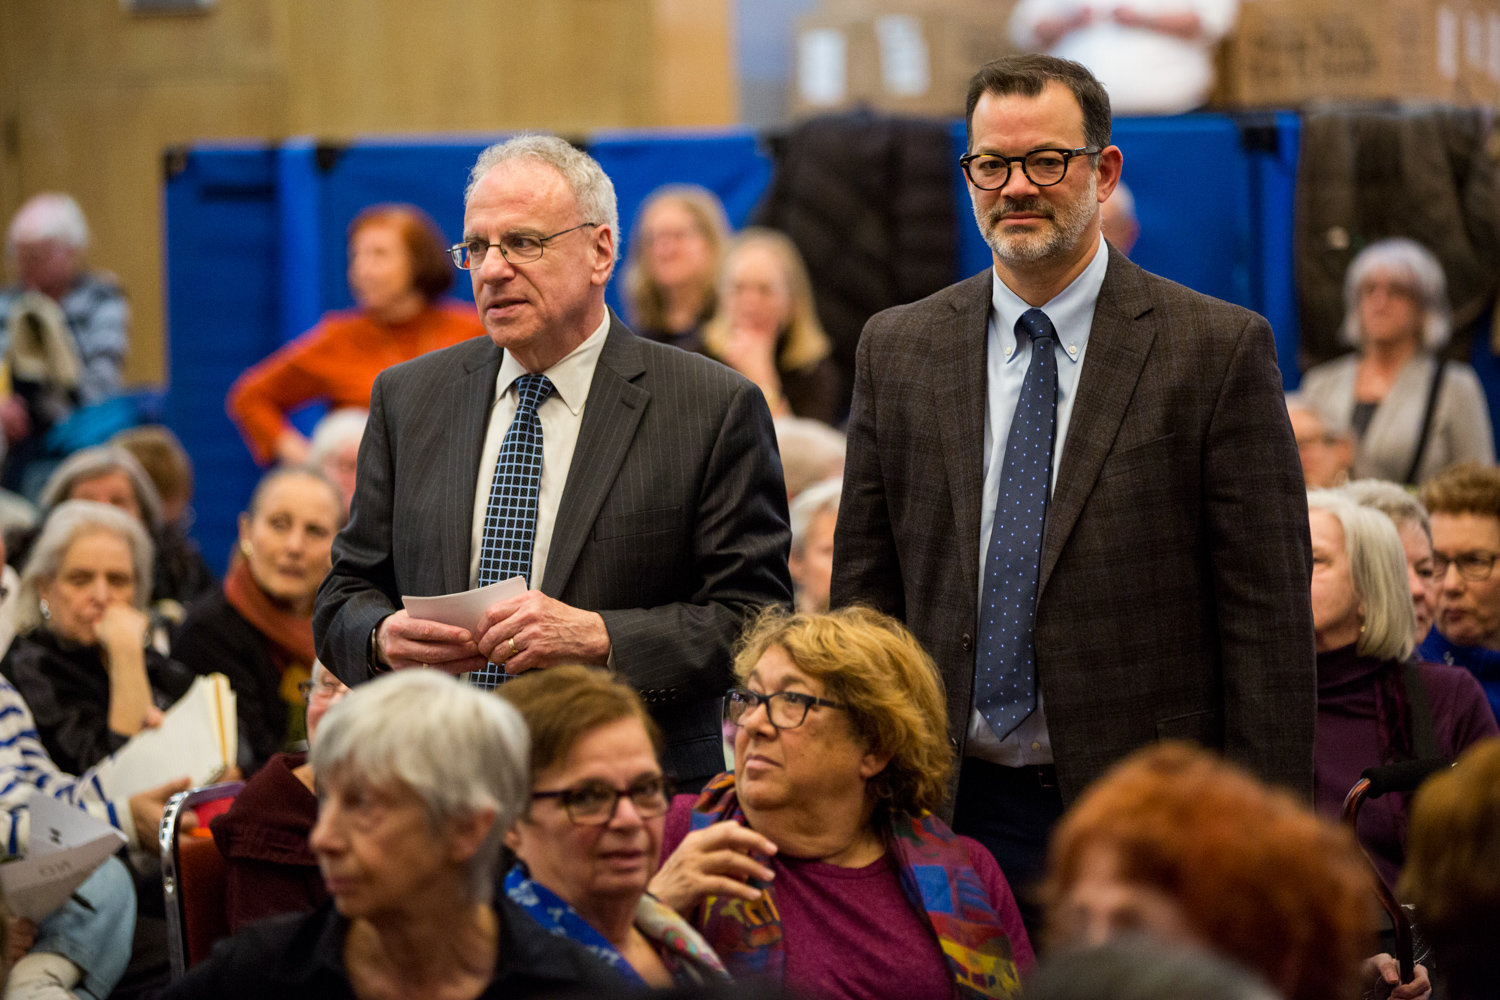 Assemblyman Jeffrey Dinowitz and Councilman Andrew Cohen moderate a question-and-answer session between community members and Metropolitan Transportation Authority officials during a Nov. 18 meeting at Riverdale Temple about proposed cuts to express bus service.